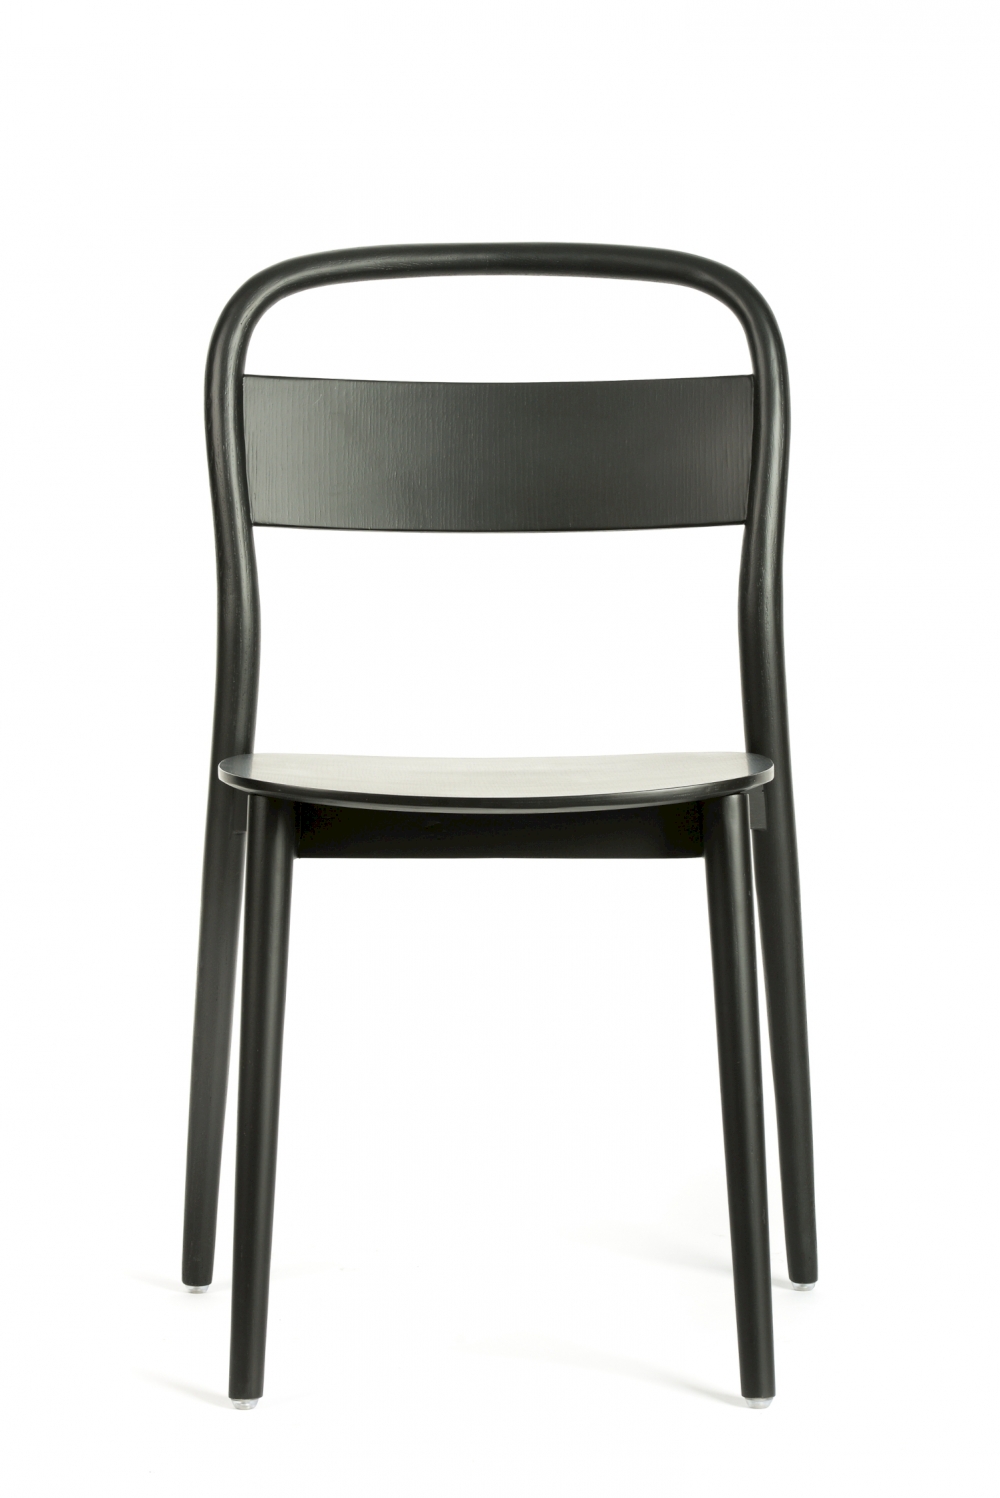 YUE chair Chair. Designed for Dohaus by Mikko Laakkonen.